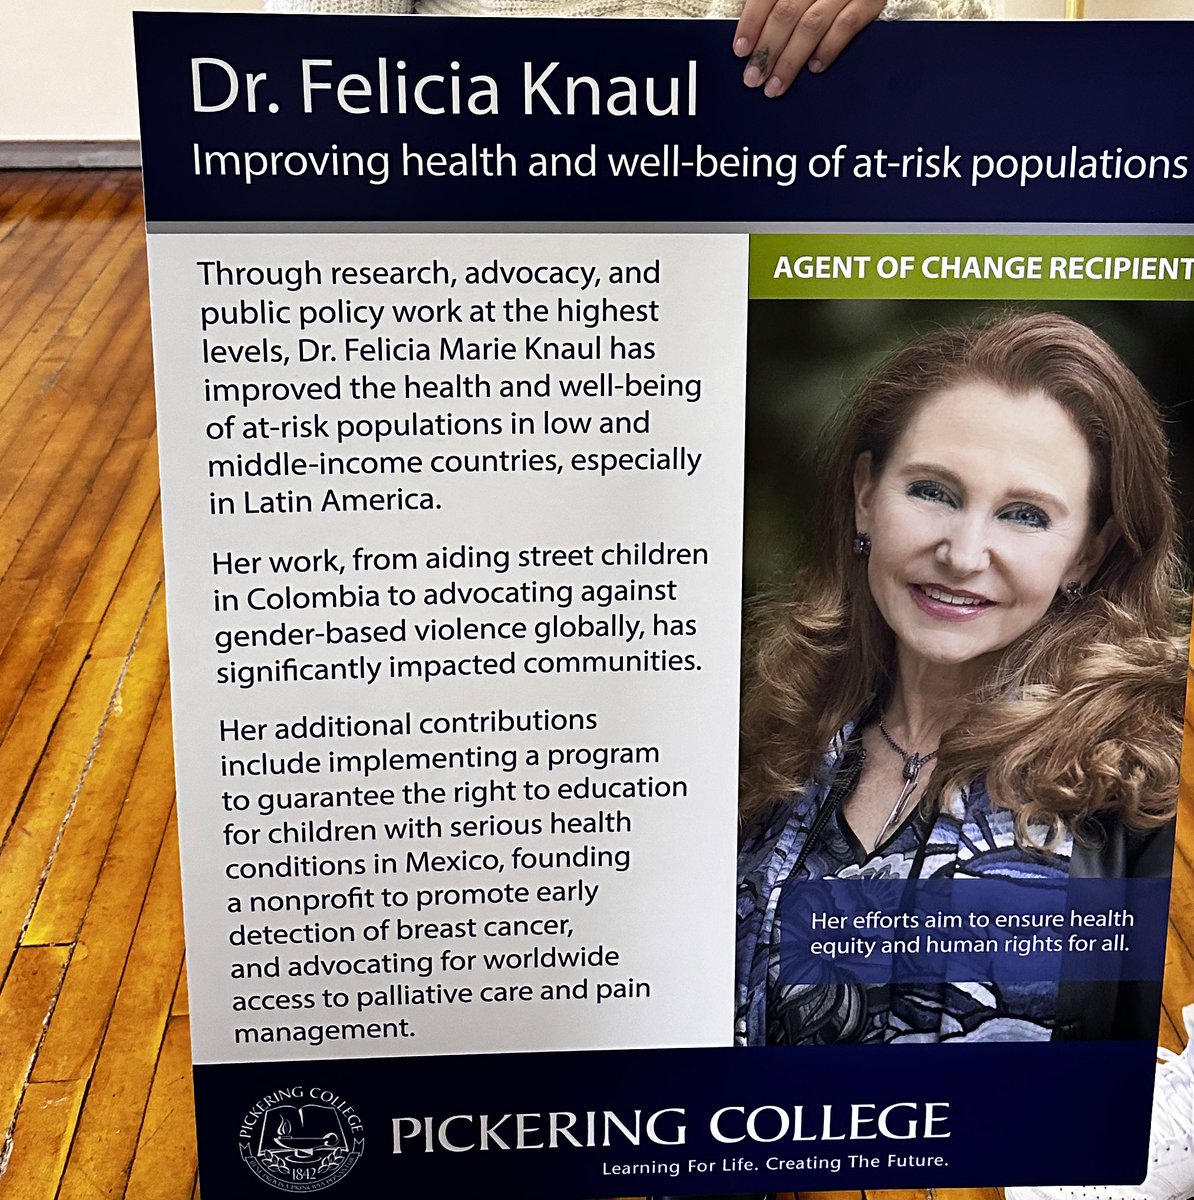 So honoured to receive the Agent of Change award @PickeringColl This wonderful school has done so much for children and youth since its founding in 1842 as a Quaker school that values and teaches global equity and social consciousness, and seeks to contribute to making our world